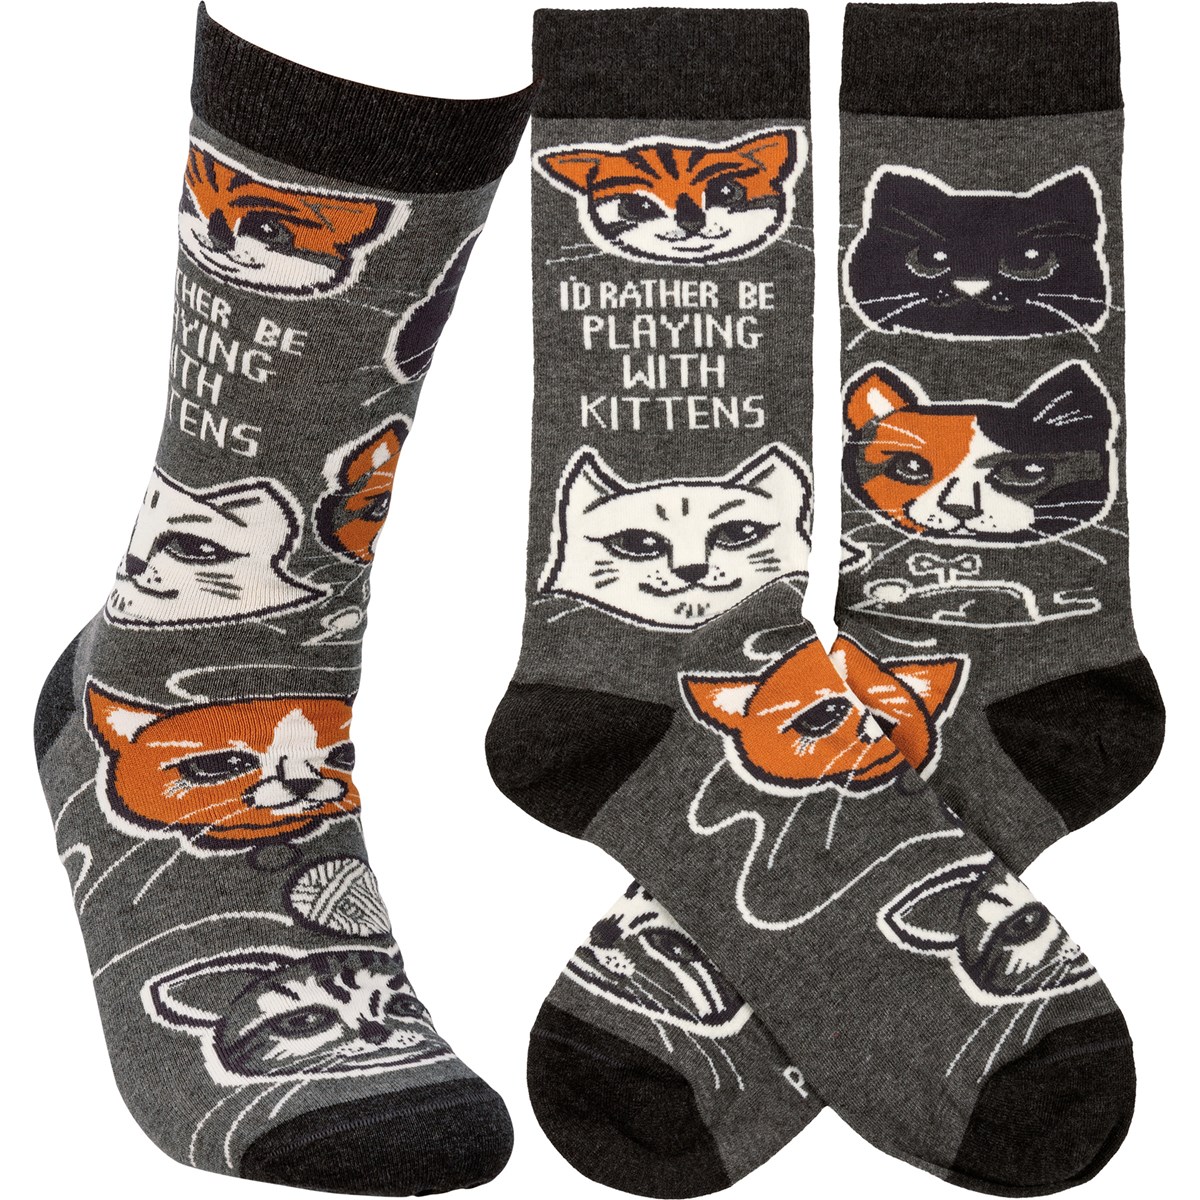 I'd Rather Be Playing With Kittens Socks - Cotton, Nylon, Spandex